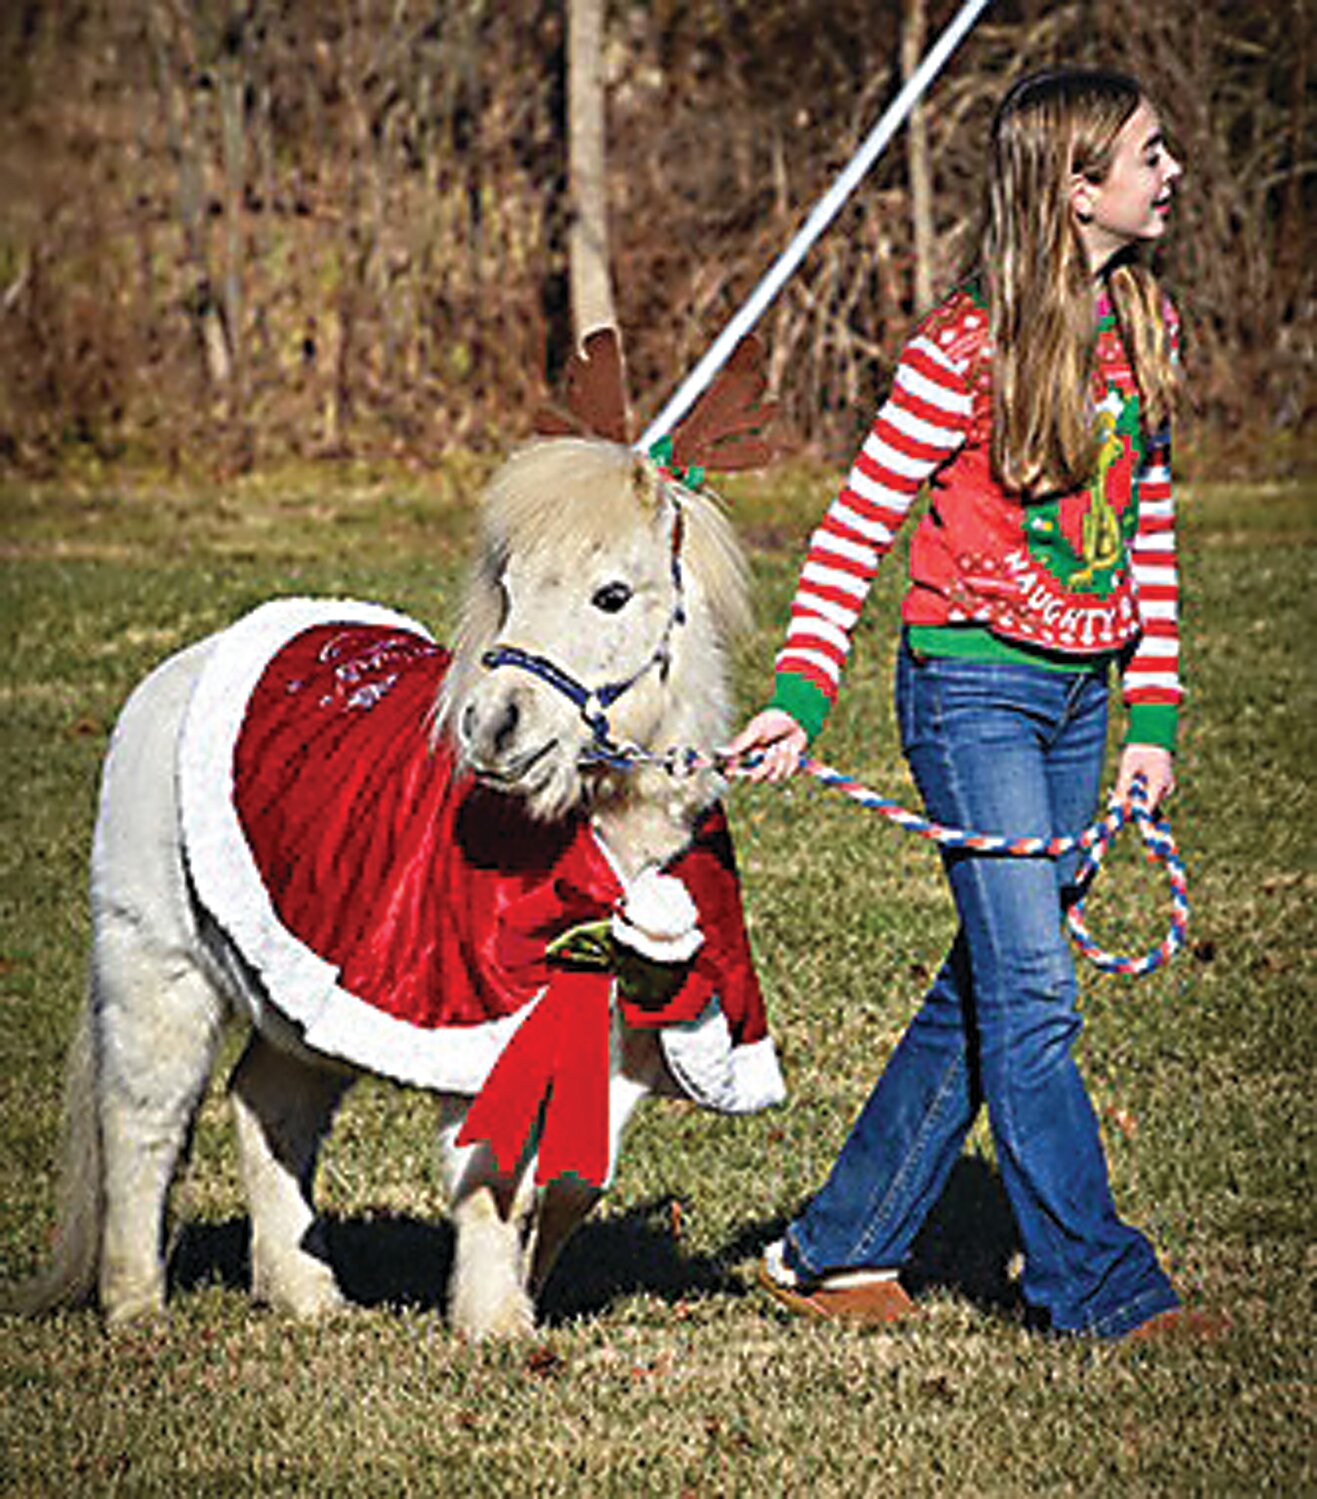 A miniature horse wearing reindeer antlers assists in the search for candy canes at Springtown Rod & Gun Club.